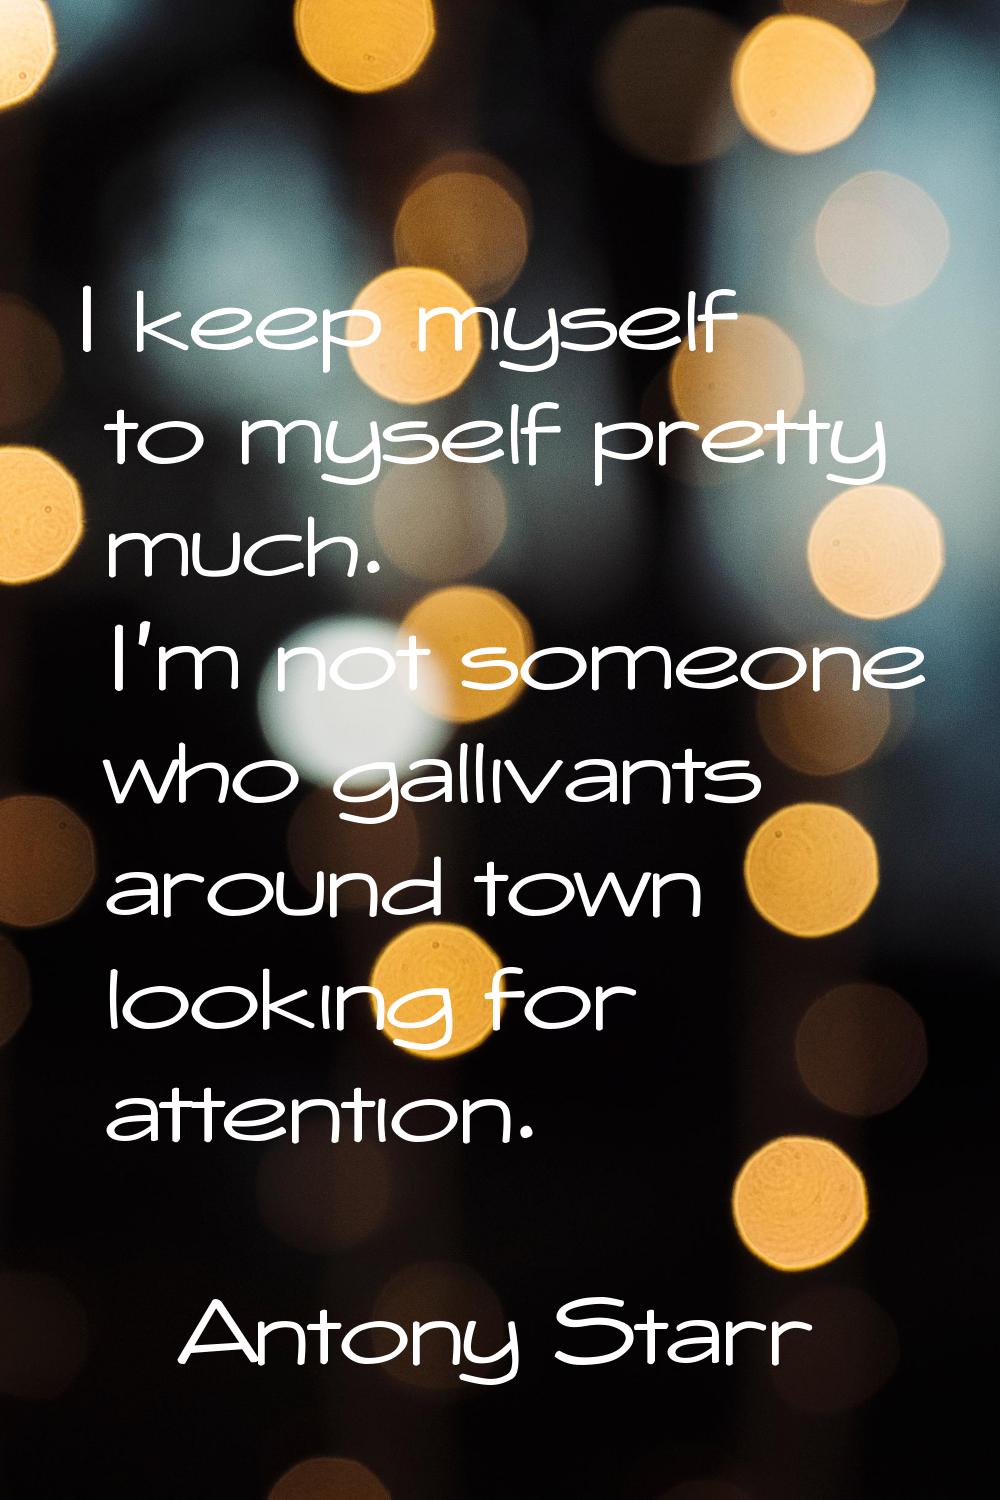 I keep myself to myself pretty much. I'm not someone who gallivants around town looking for attenti